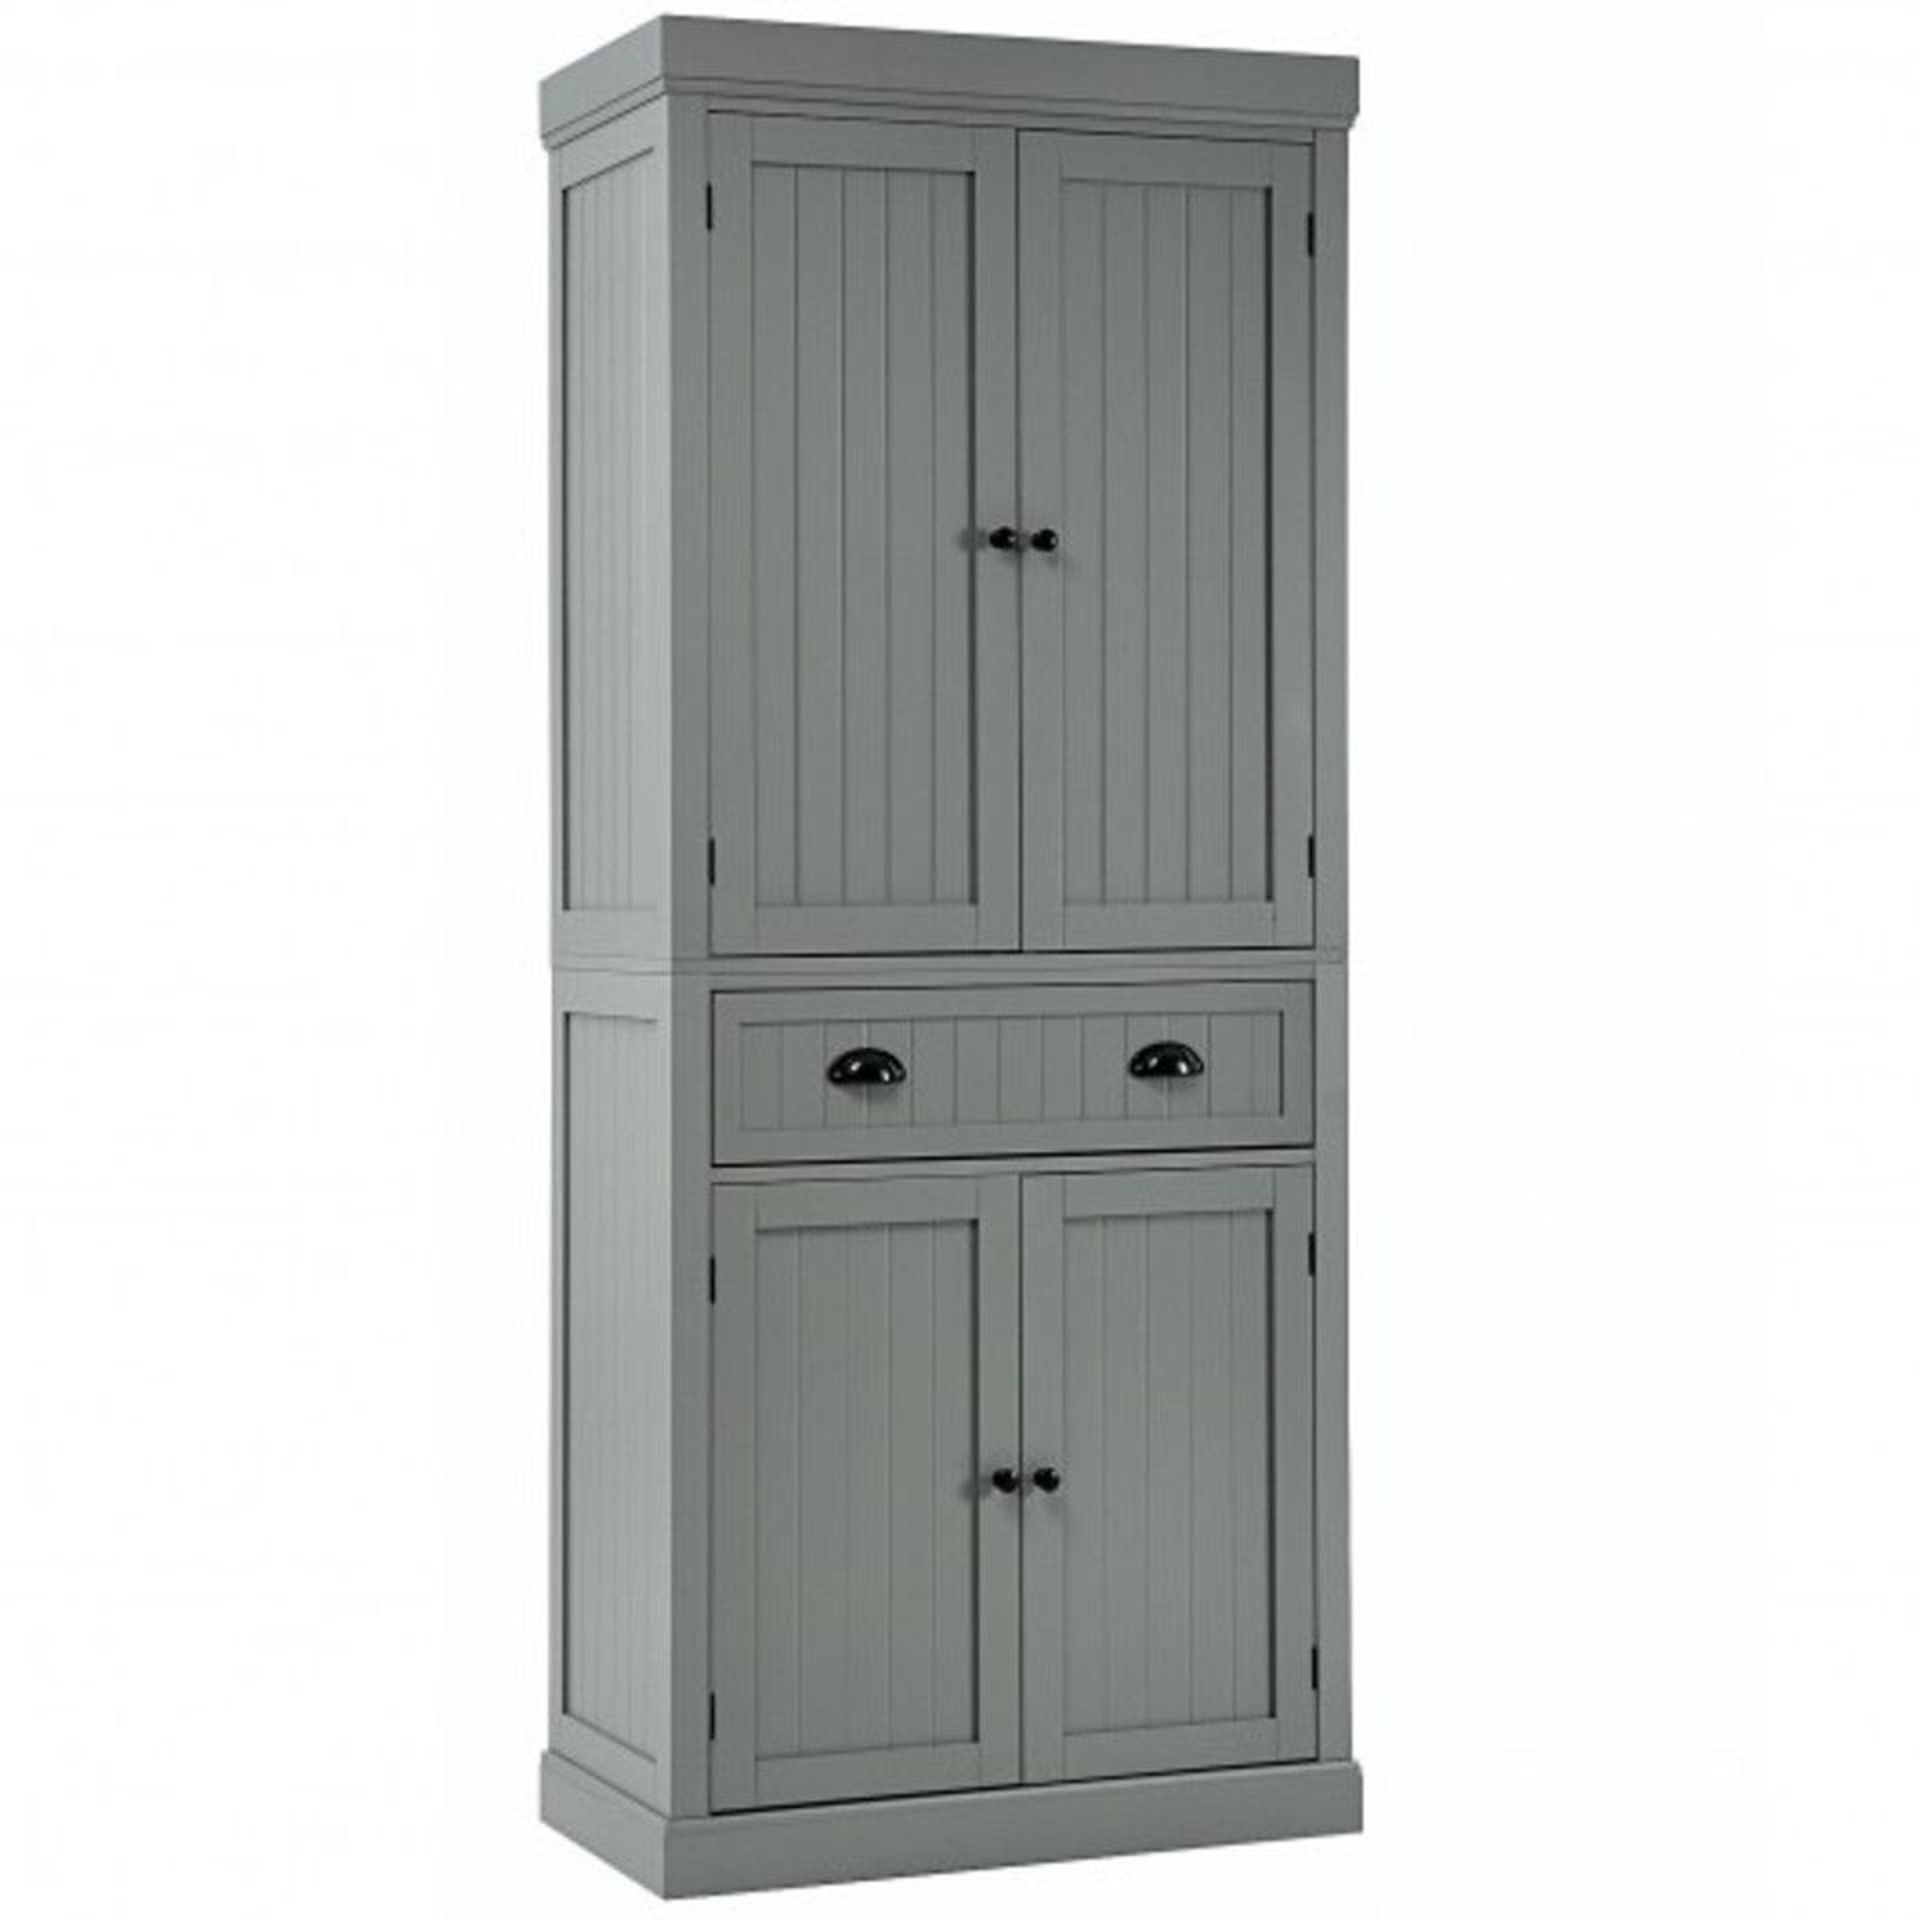 Cupboard Freestanding Kitchen Cabinet W/ Adjustable Shelves. - ER54. This is the practical storage